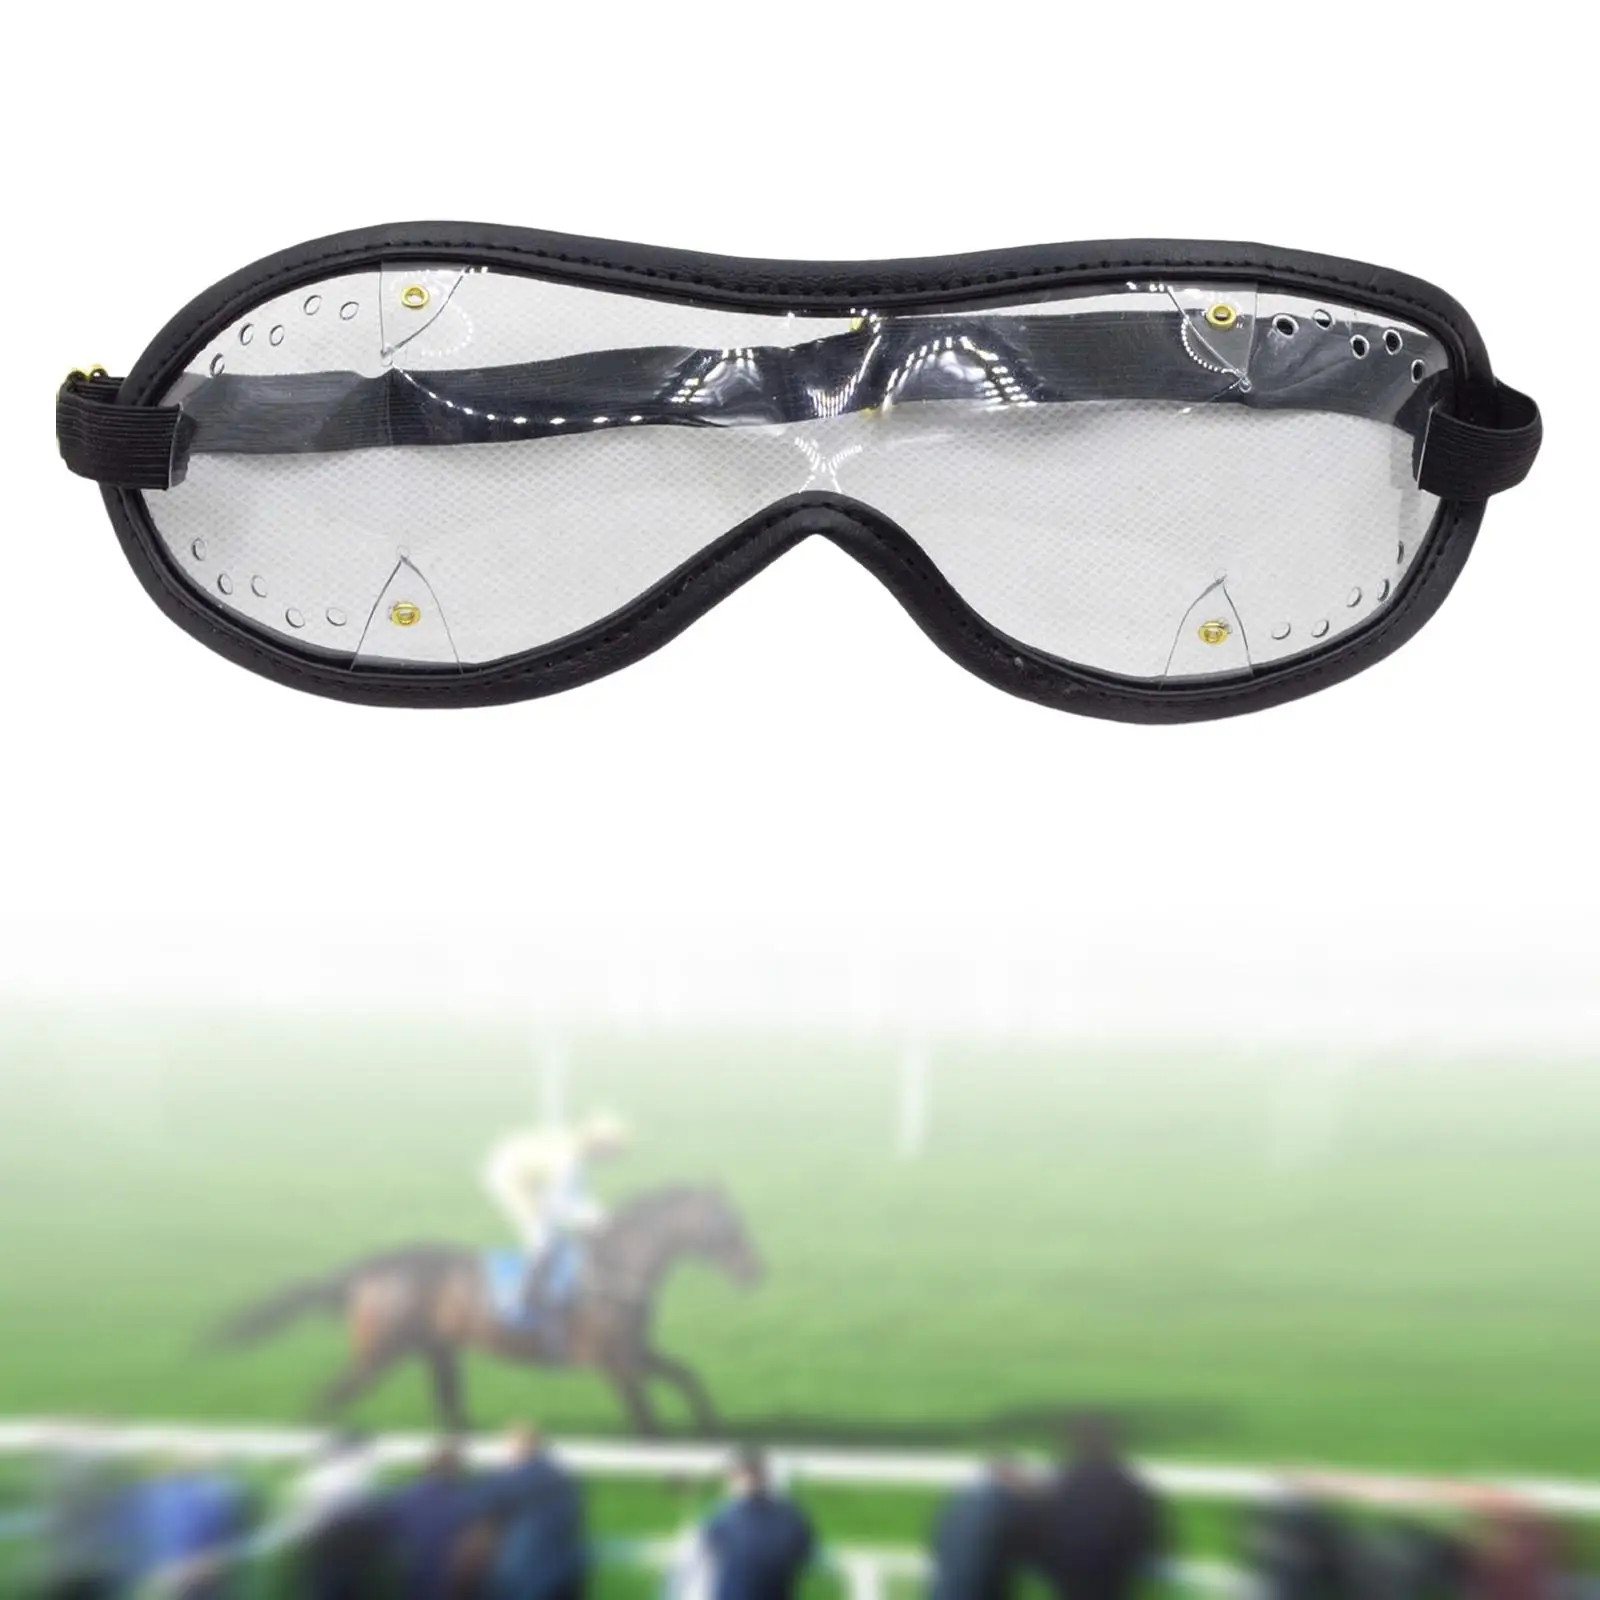 Outdoor Glasses Eye Protection Windproof Adjustable Strap for Sports Motorcycle Unisex